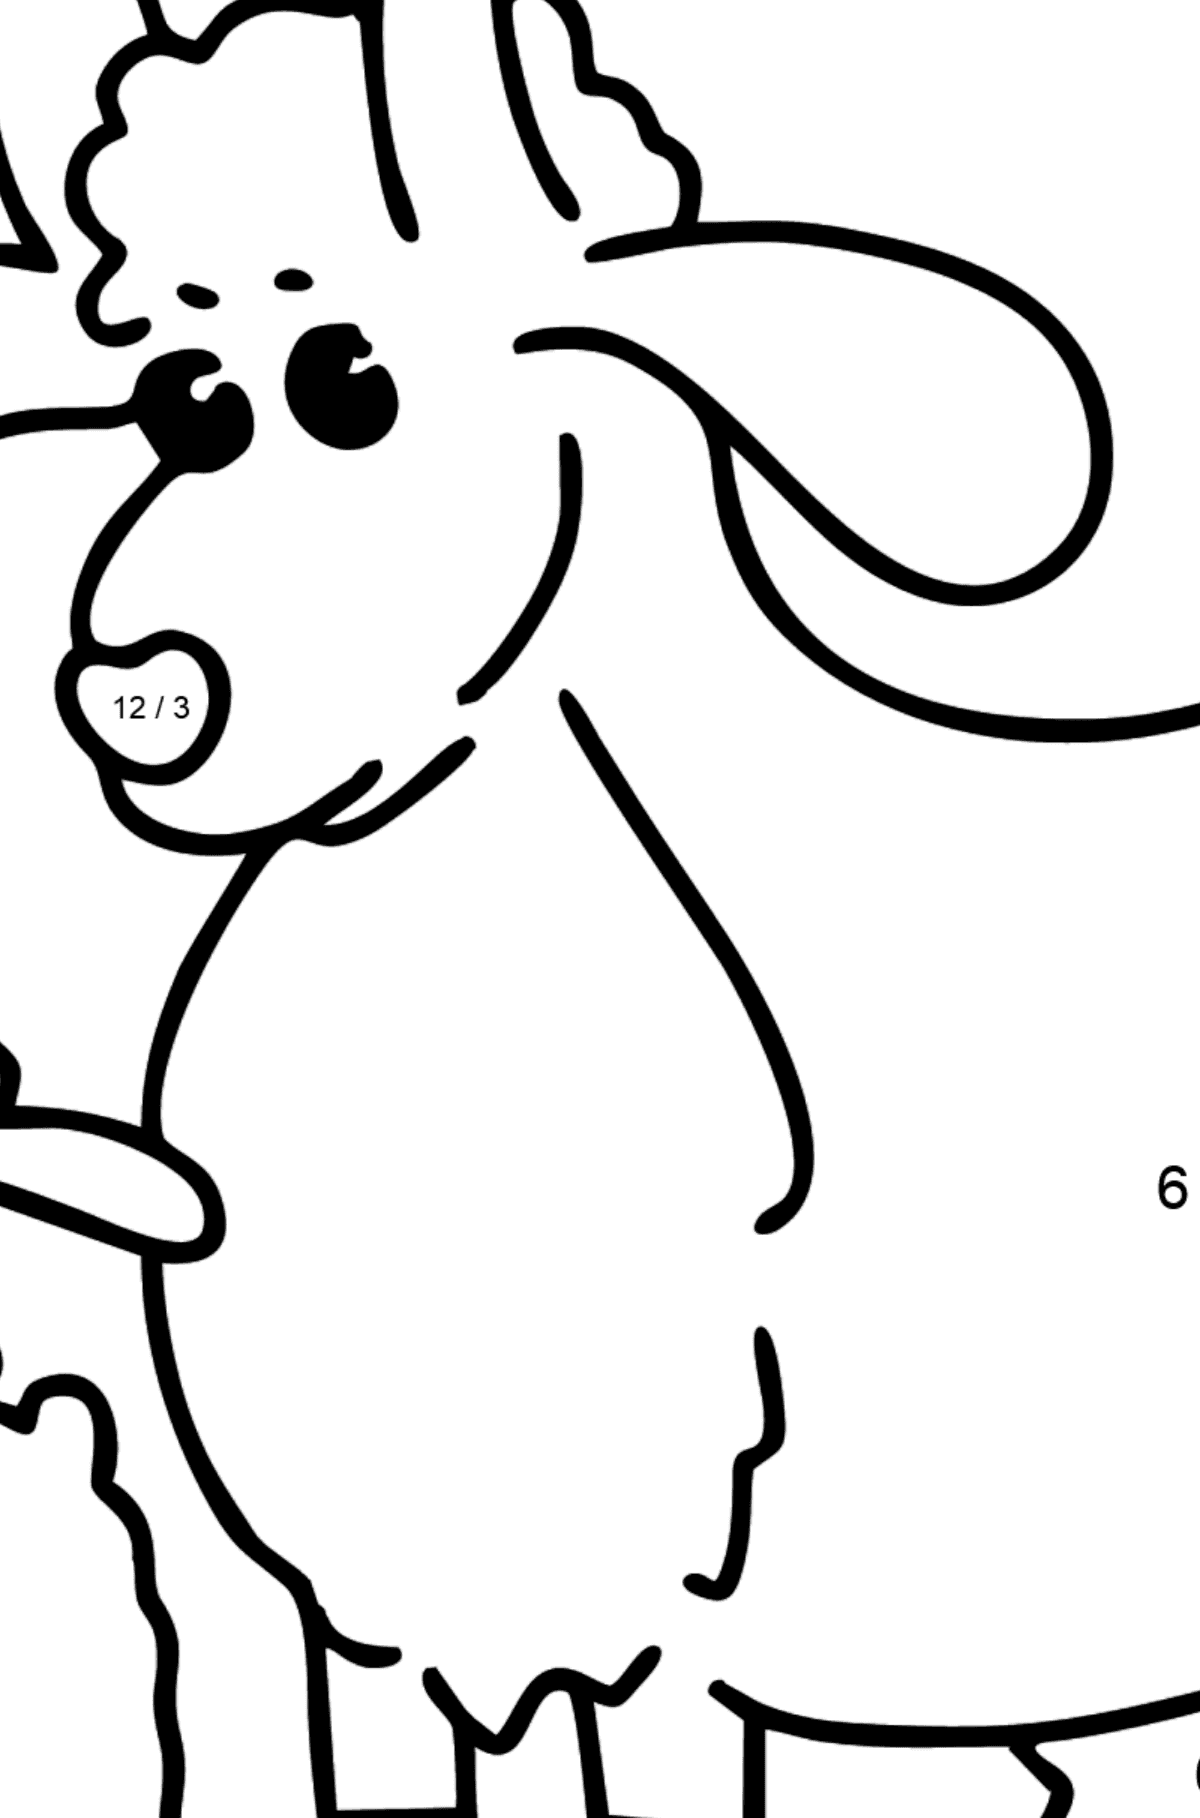 Goat and Kid coloring page - Math Coloring - Division for Kids